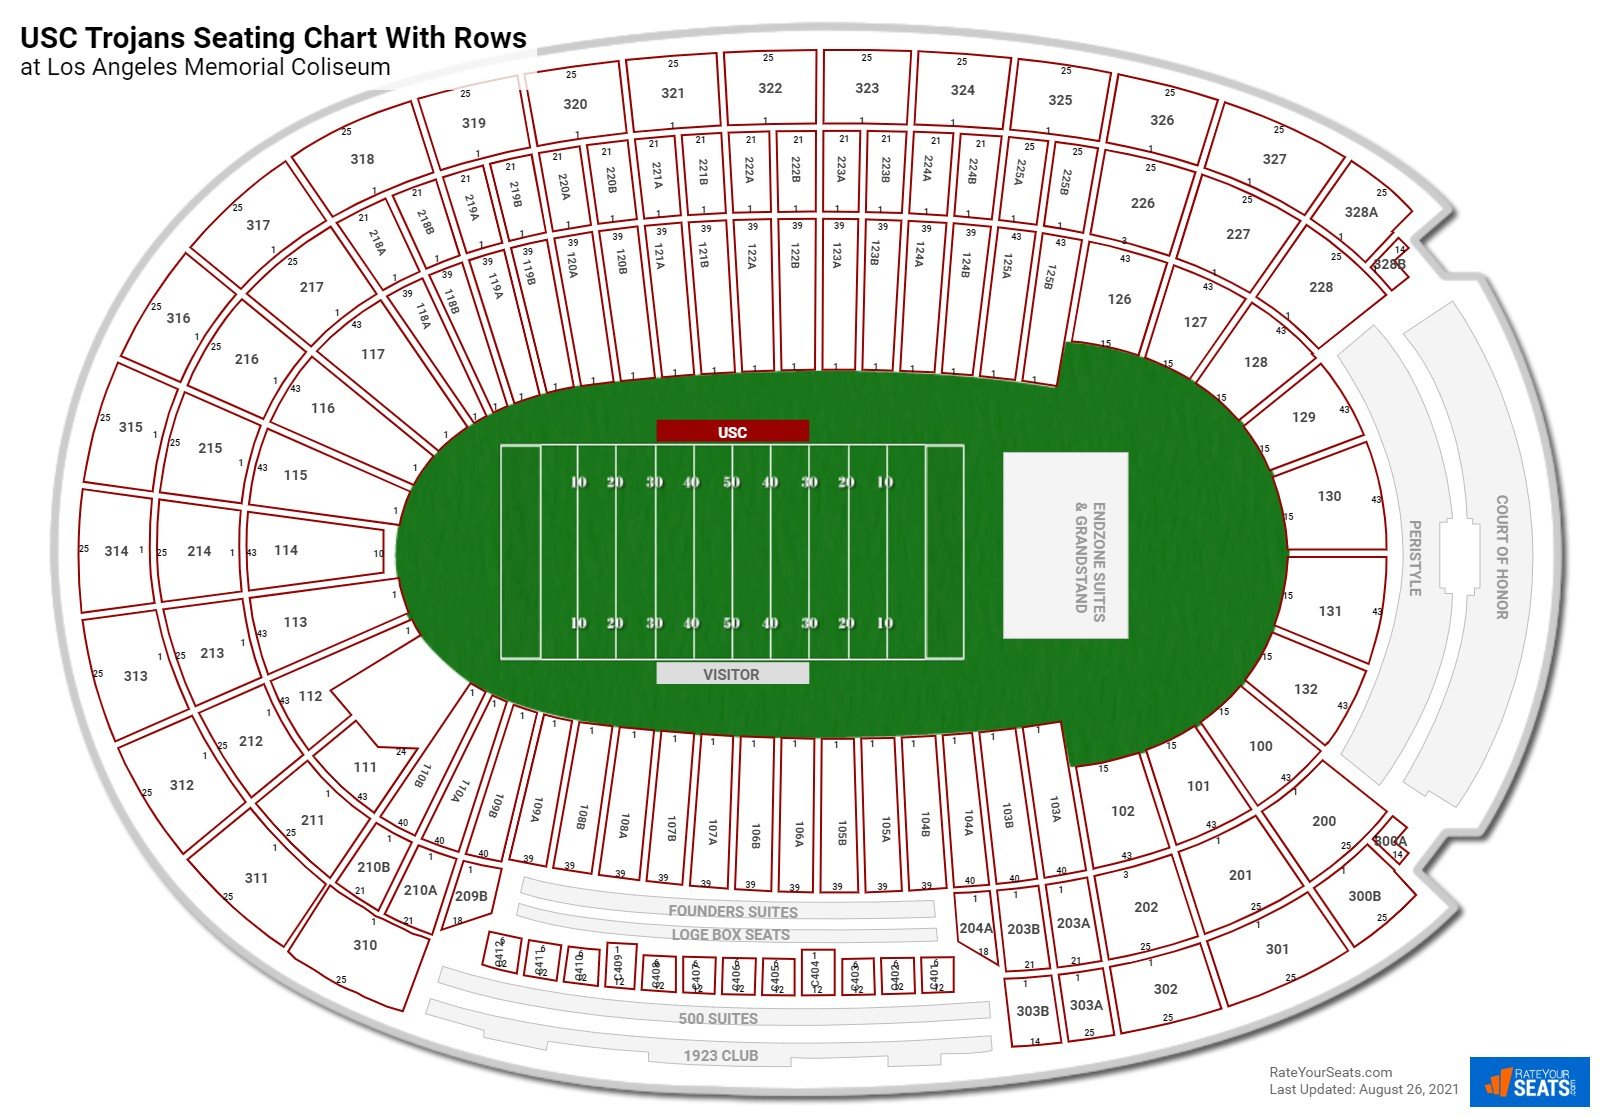 Los Angeles Memorial Coliseum seating chart with row numbers